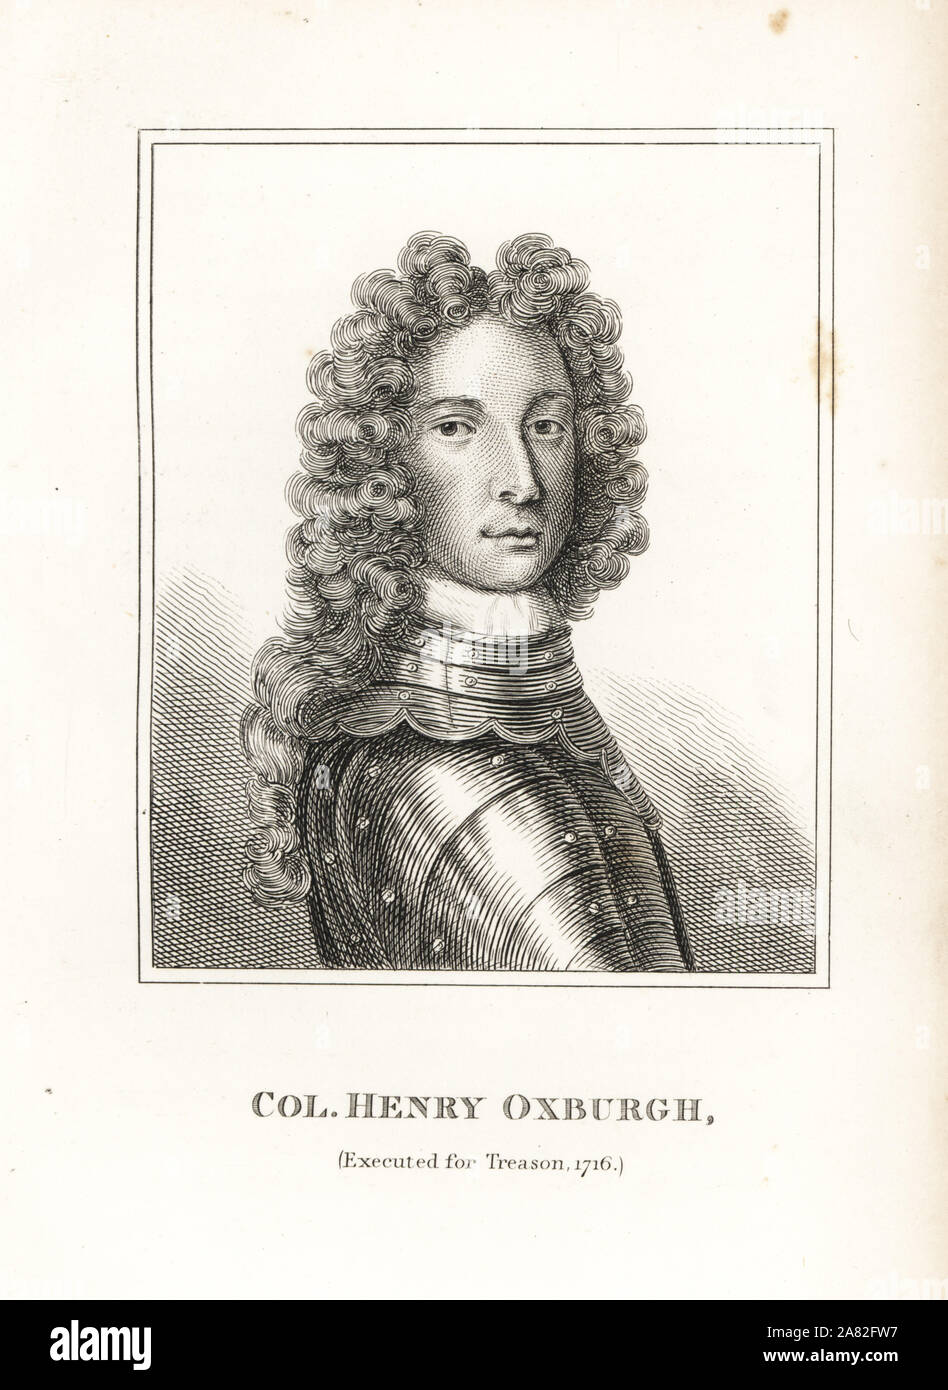 Colonel Henry Oxburgh, rebel supporter executed for treason at Tyburn, 1716. Engraving by R. Grave from James Caulfield's Portraits, Memoirs and Characters of Remarkable Persons, London, 1819. Stock Photo